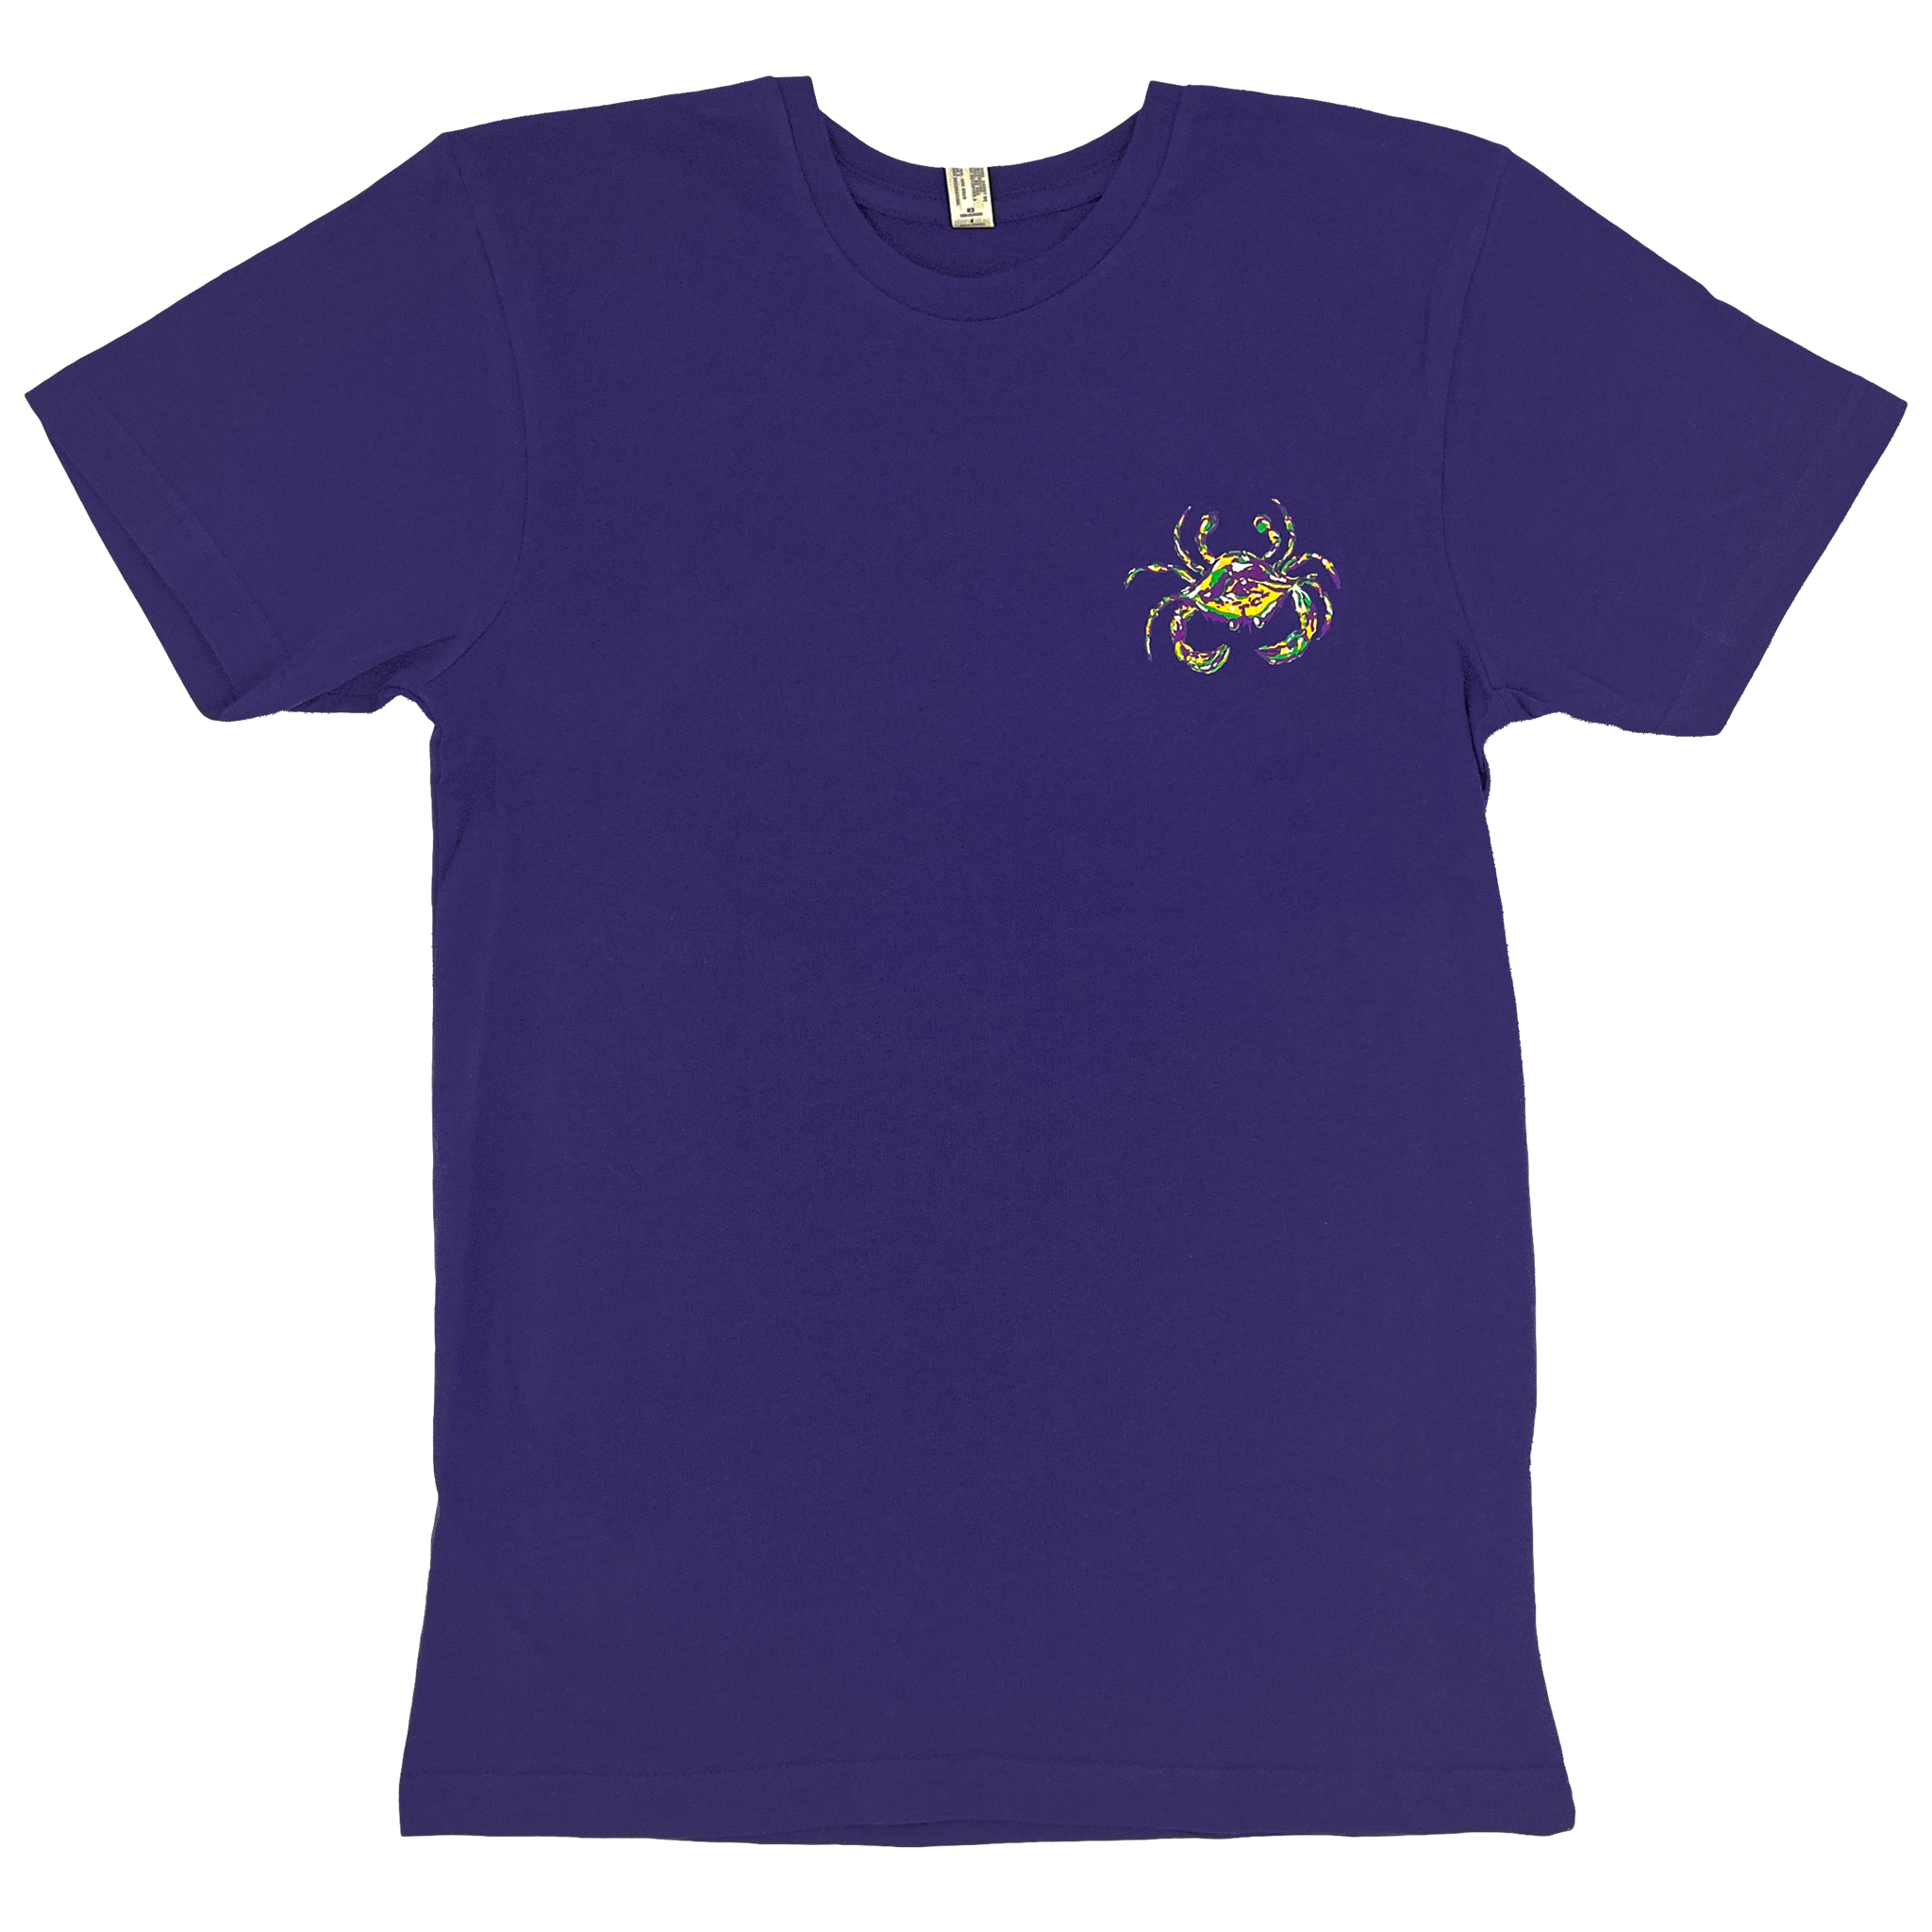 A Mardi Gras T-shirt in dark purple with a Mardi Gras Crab on the left chest.